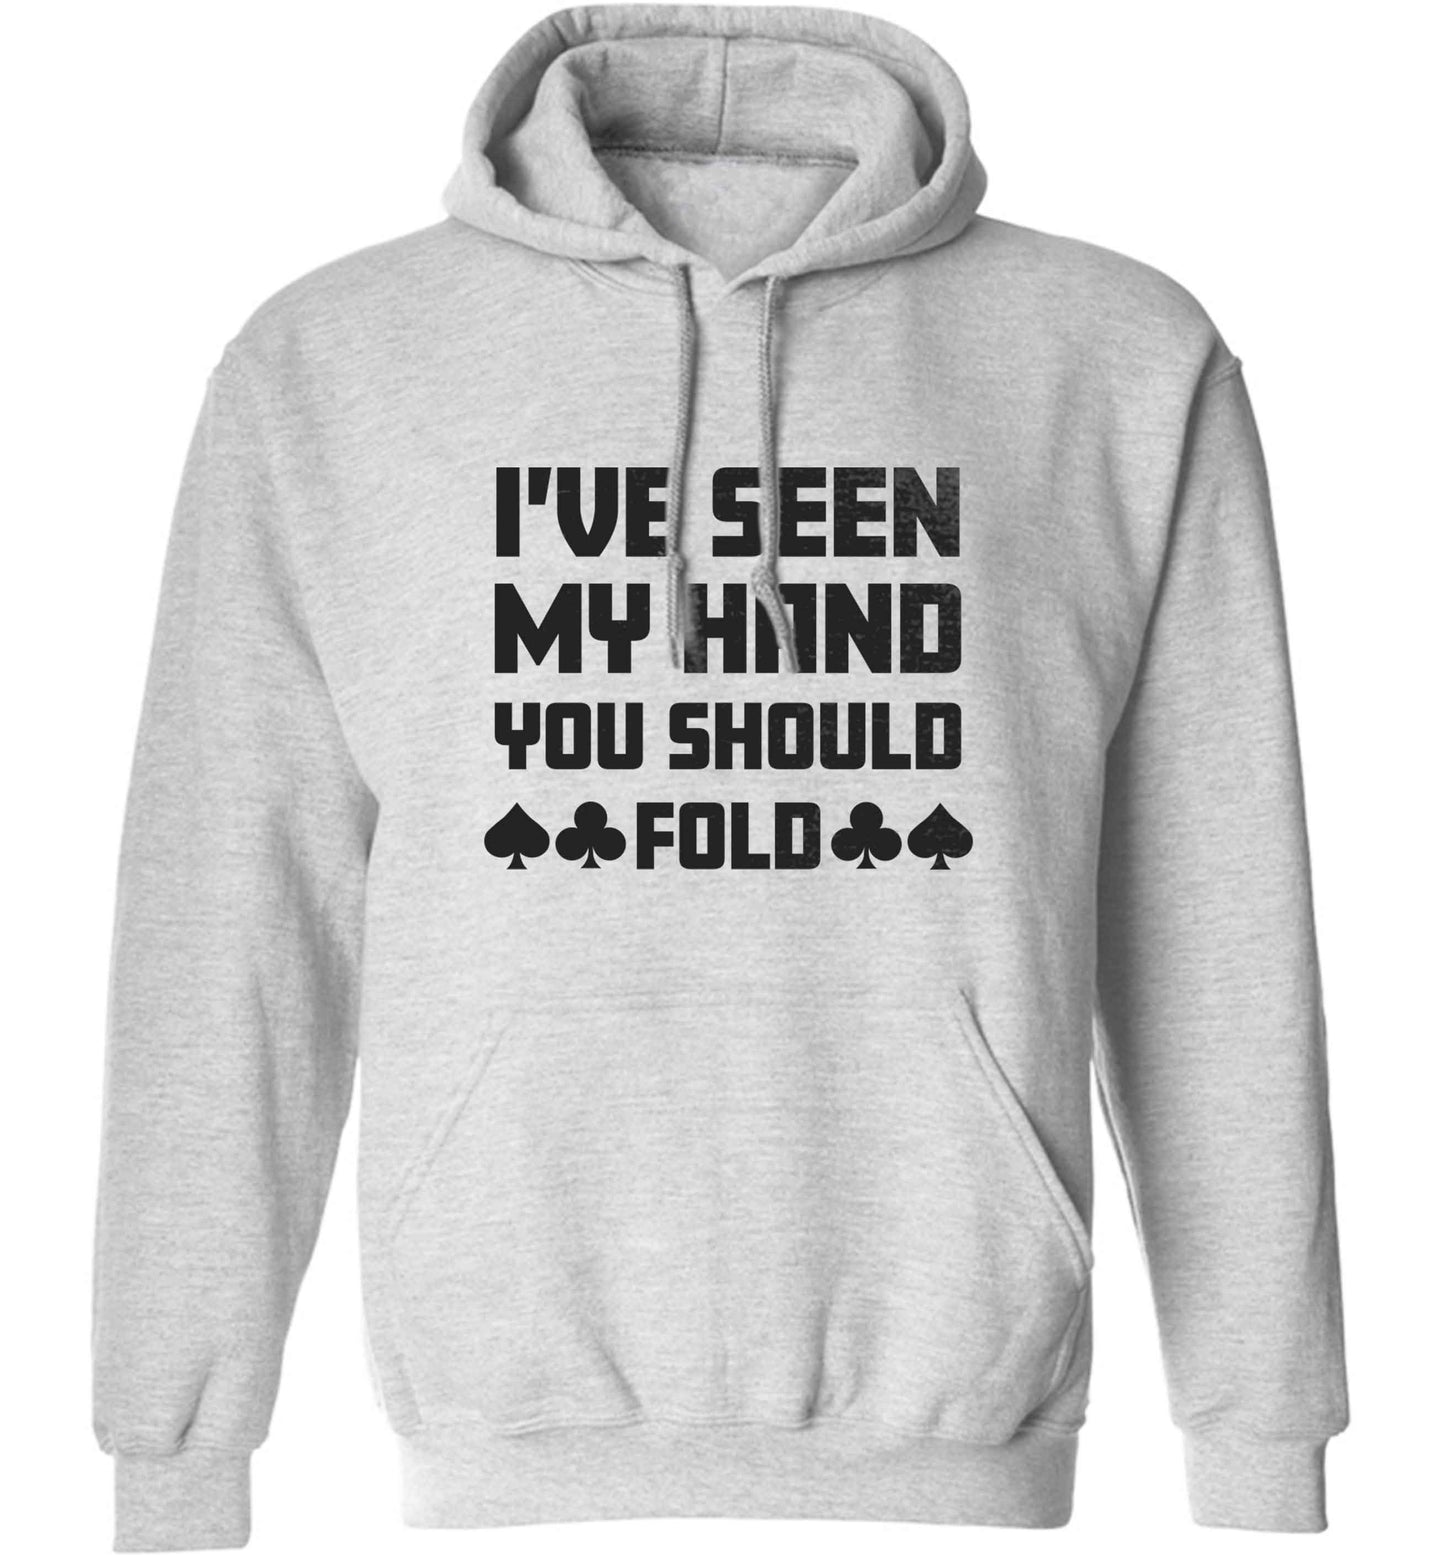 I've seen my hand you should fold adults unisex grey hoodie 2XL